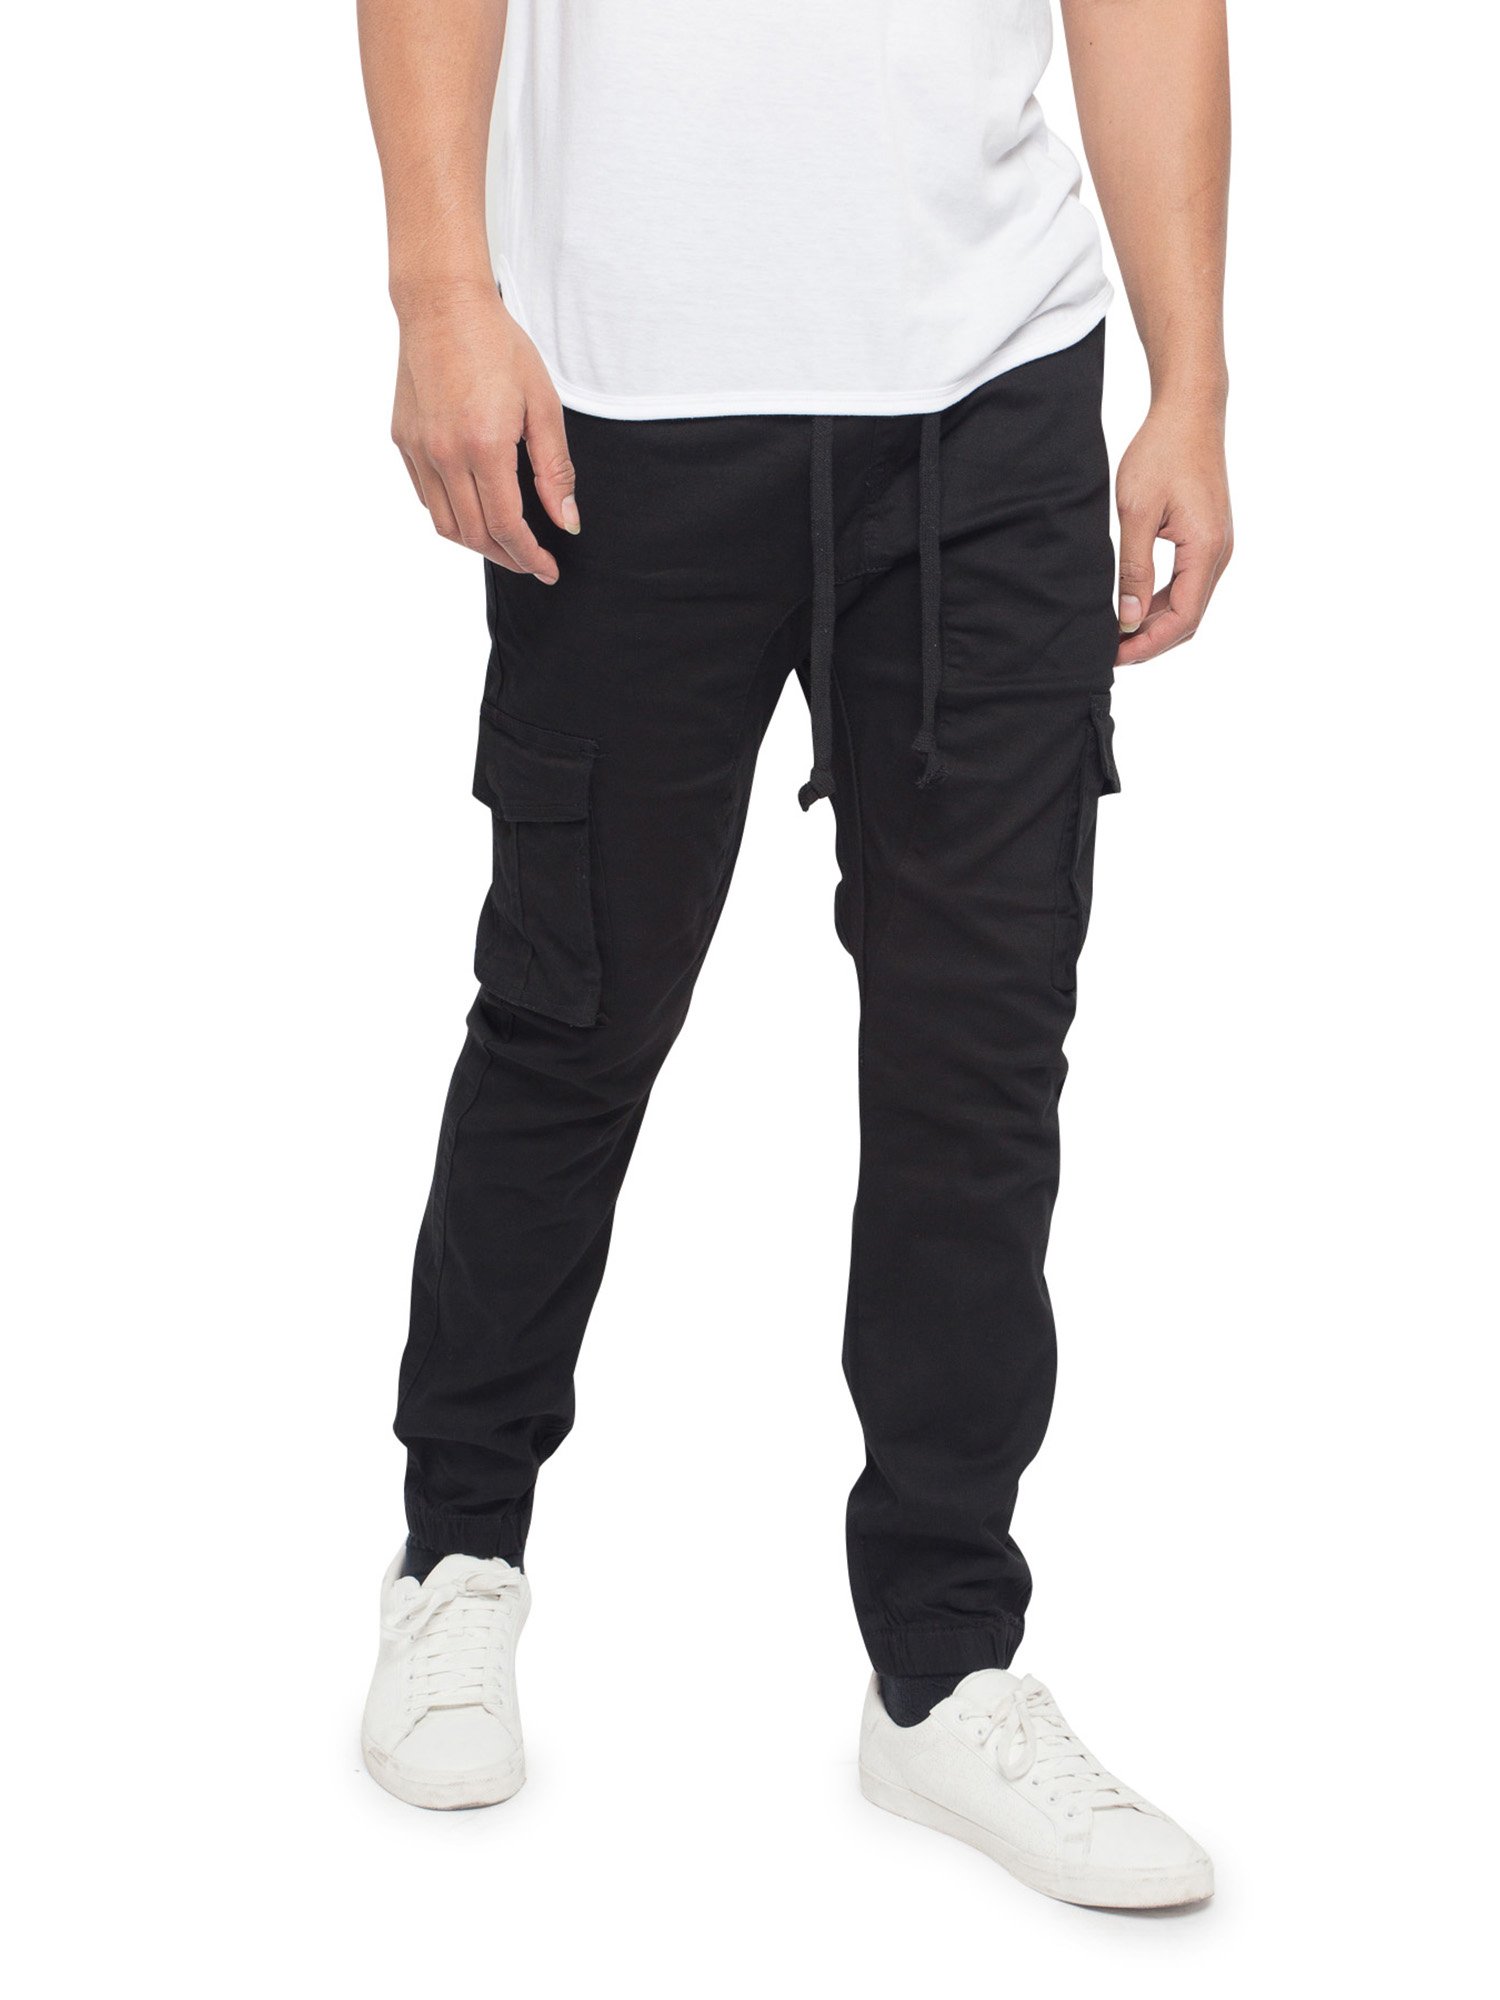 Victorious Men's Jogger Twill Cargo Pants, Up To 5X - Walmart.com